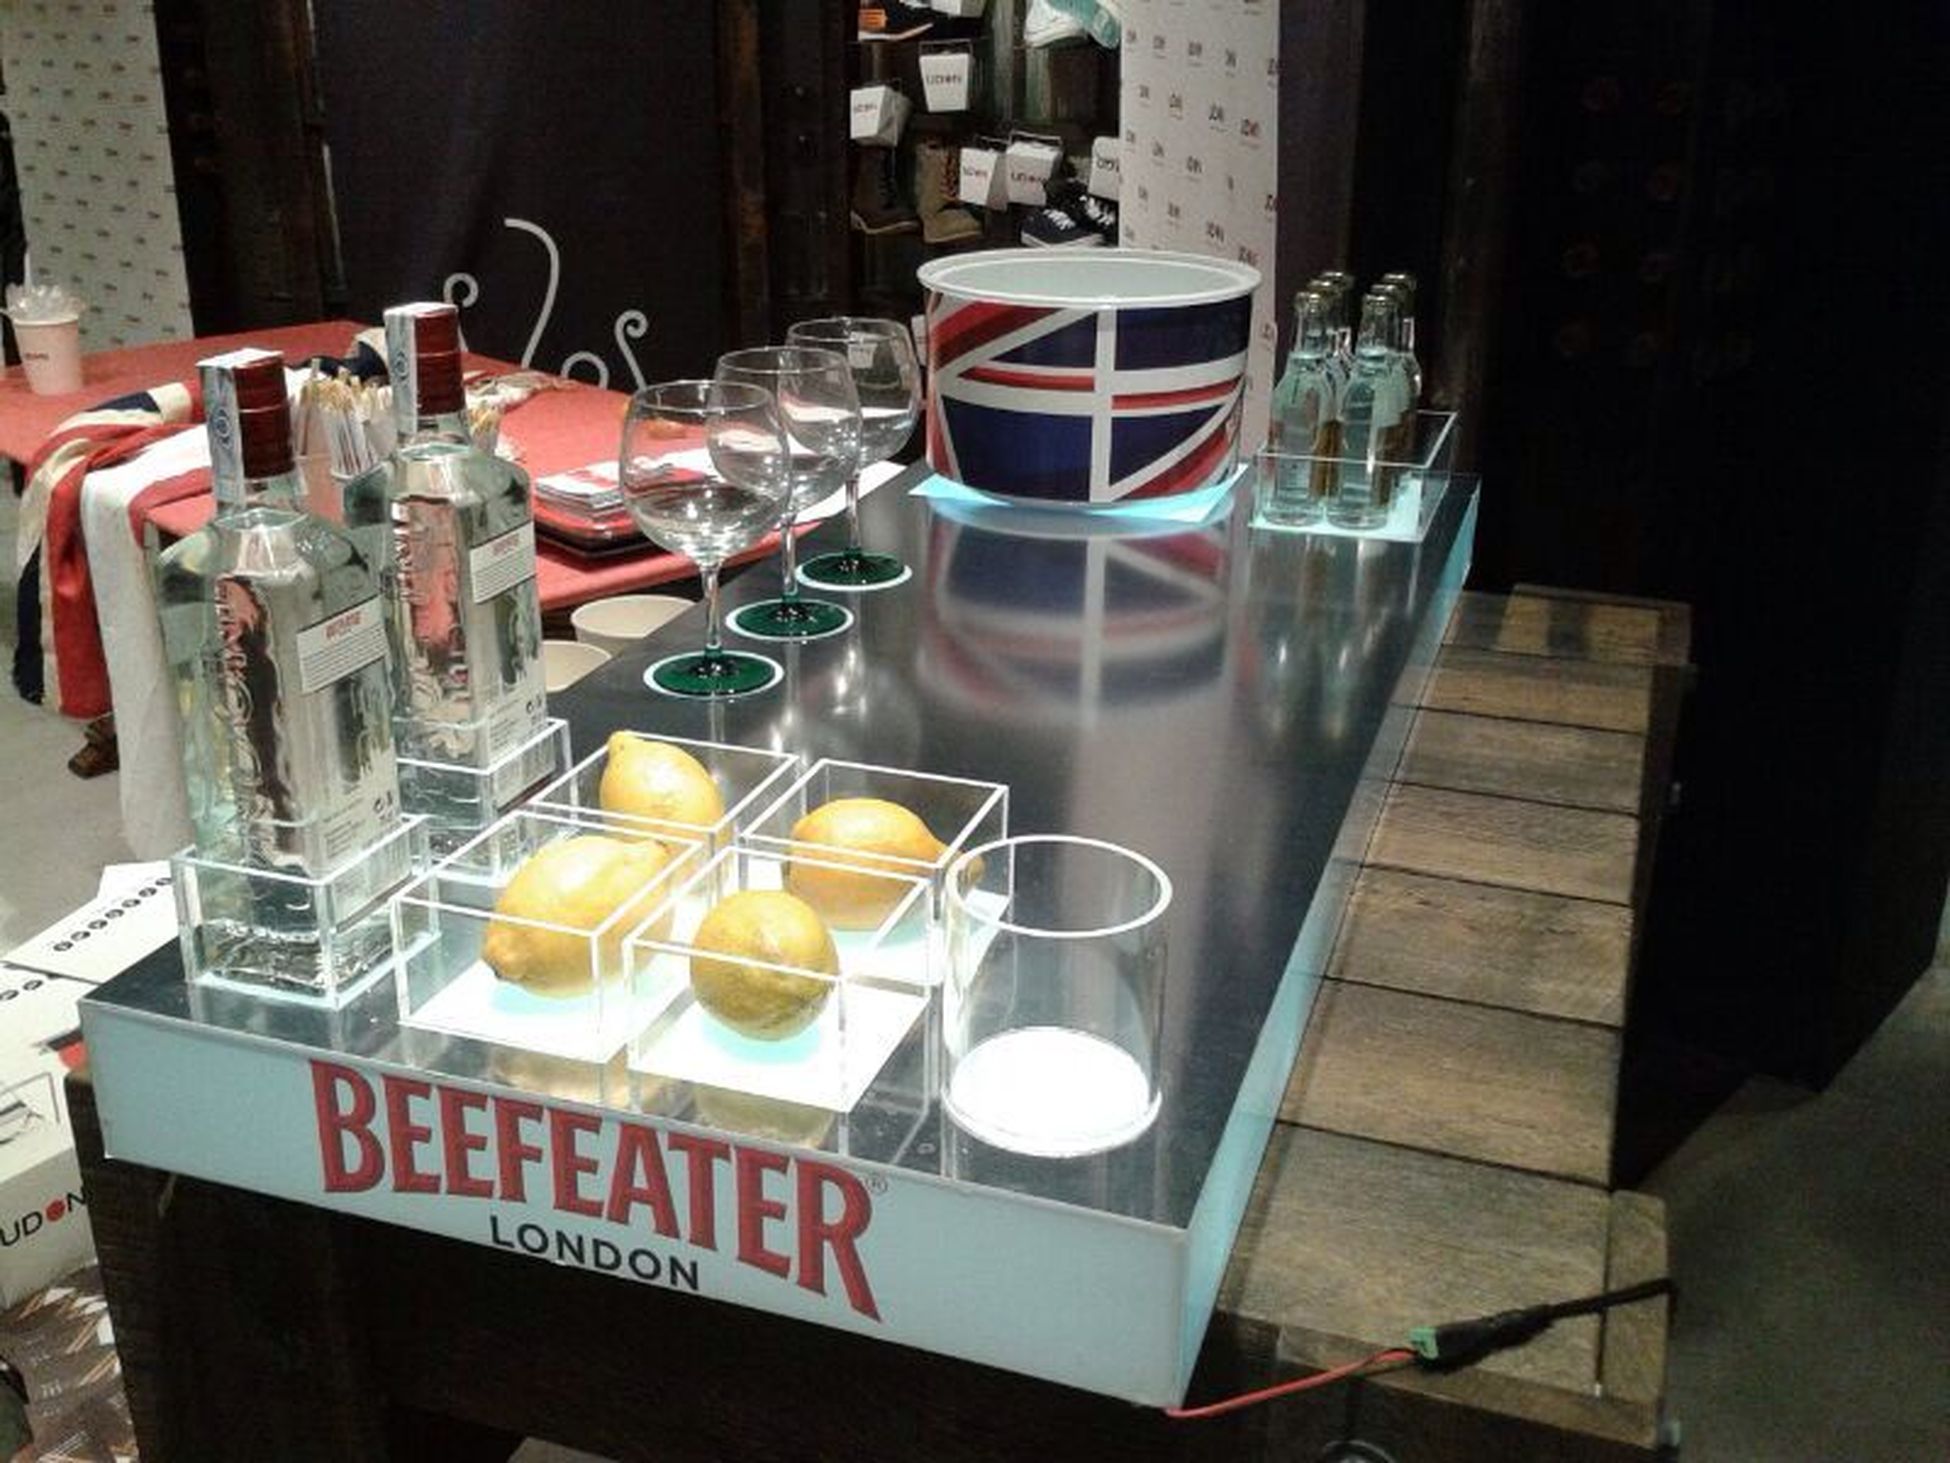 Stand Beefeater